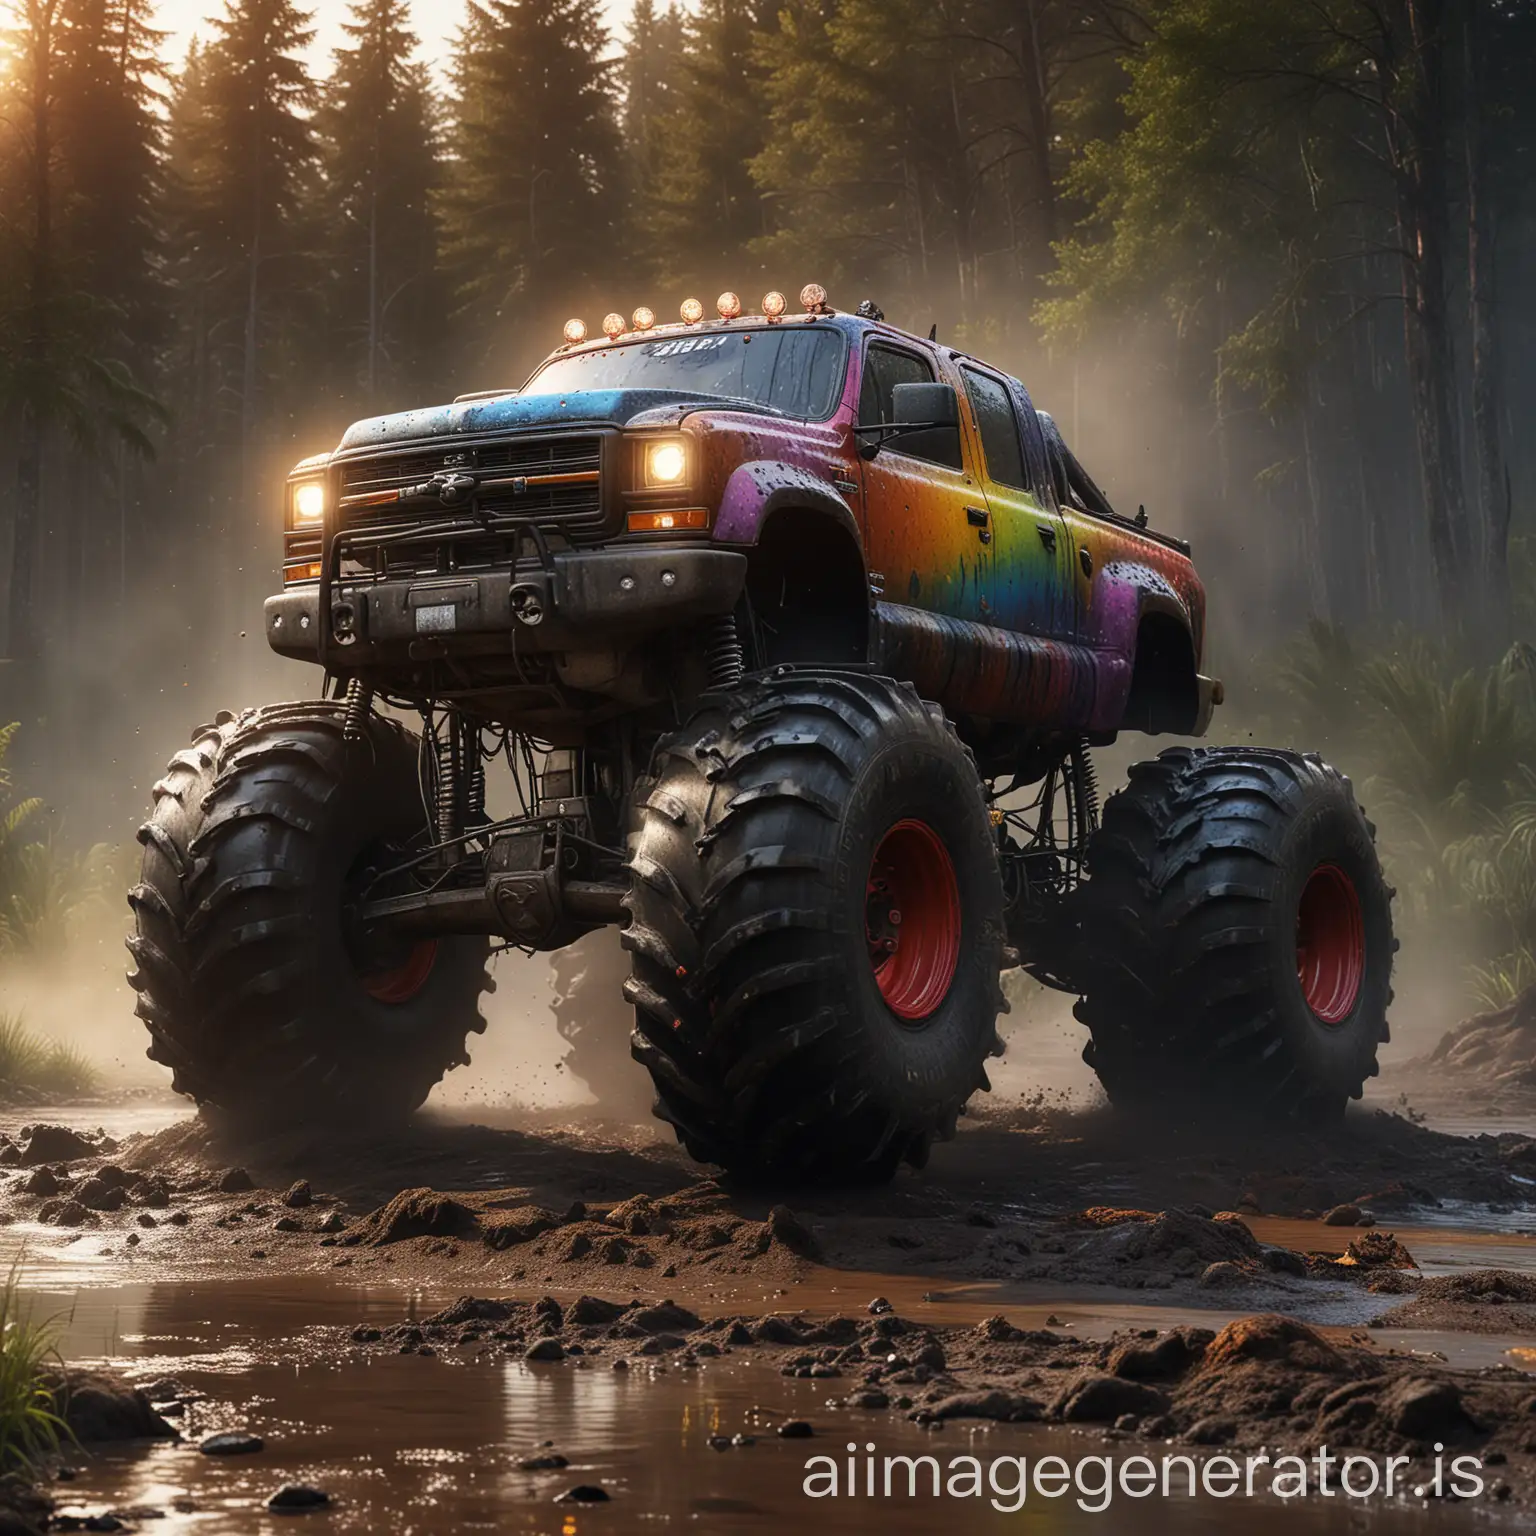 Monster Truck Creature, Dense Forest, Mud, Water Droplets, Rainbow, Exhaust Fumes, Dirt, Sunset, Reflecting Lights, High Resolution, Perfect Quality, Ultra Realistic, Real Photography